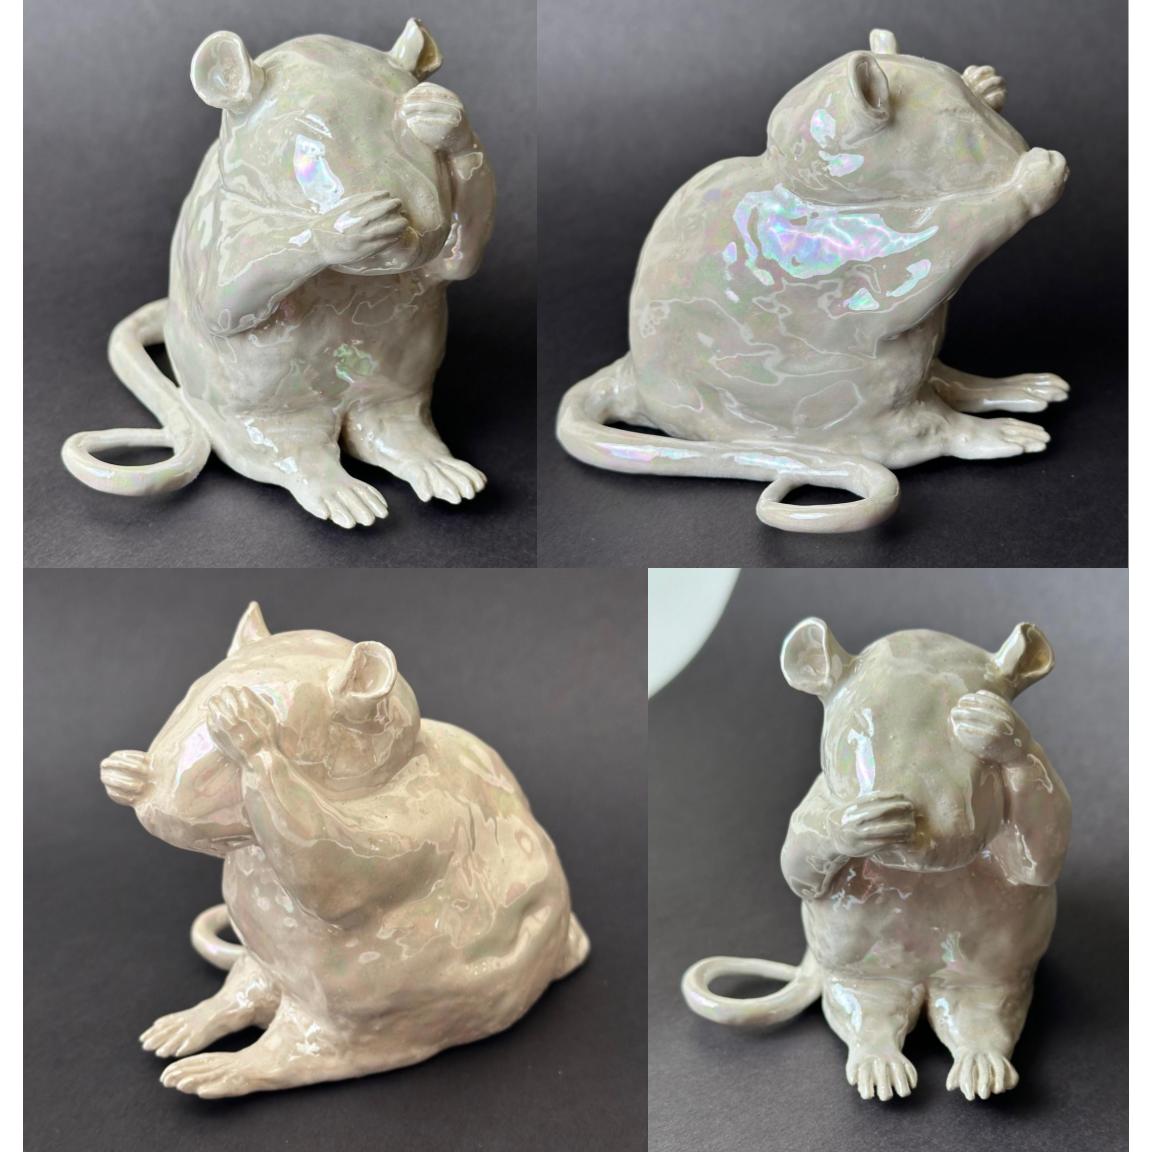 Four shots of a sculpture of a mouse with a paw in front of one eye